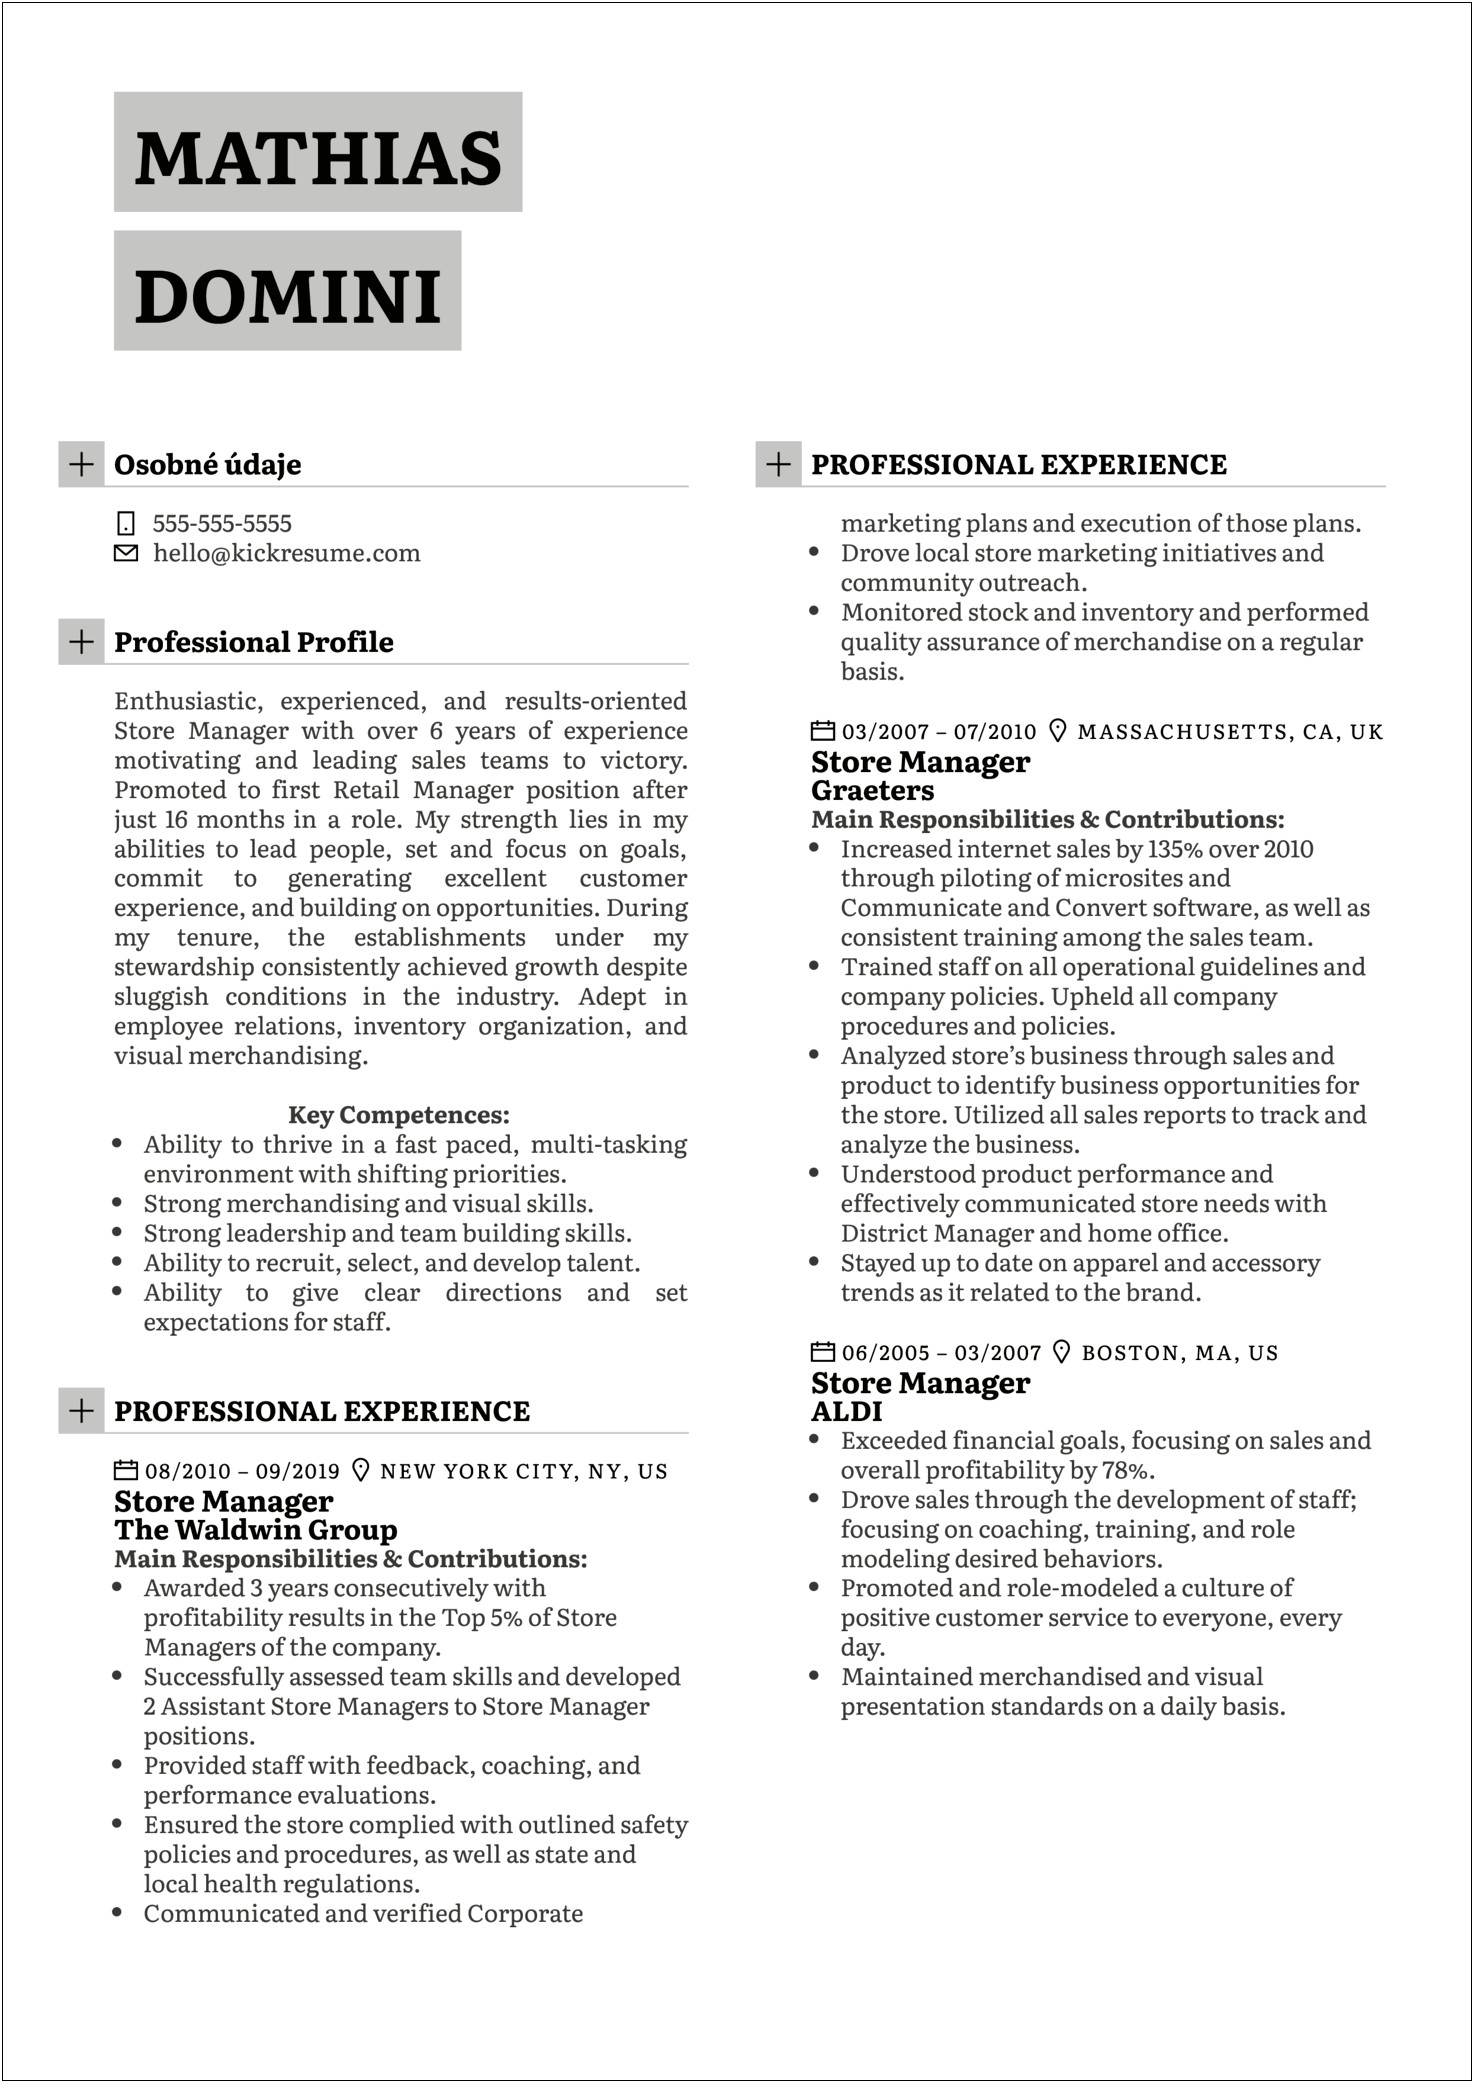 Sample Resumes Experienced Retail Managers